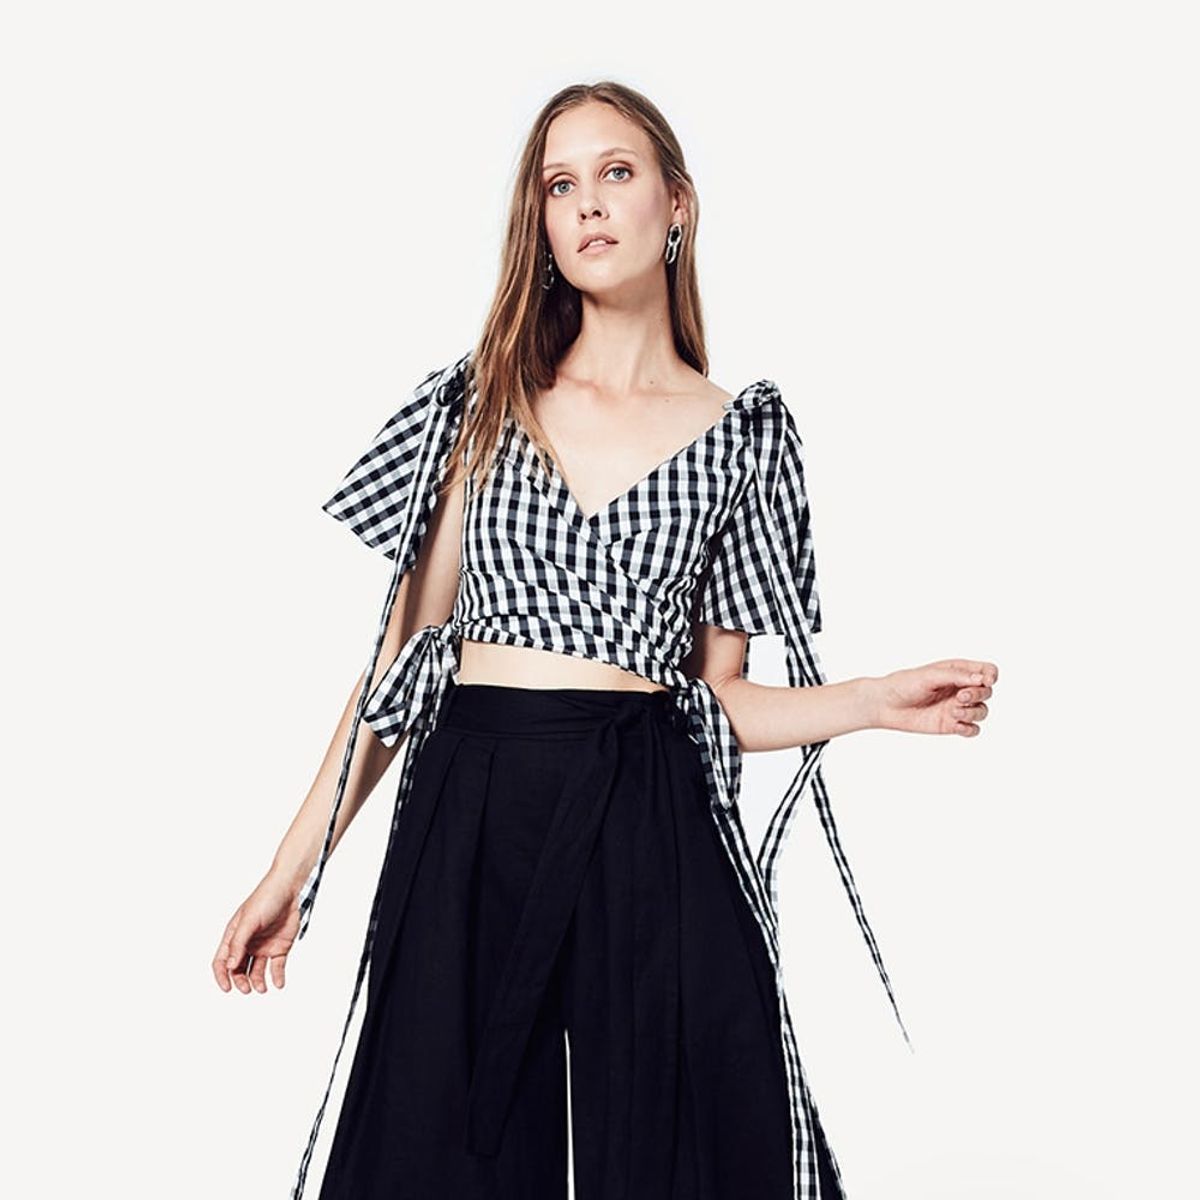 12 Crop Tops That Are Actually Sophisticated